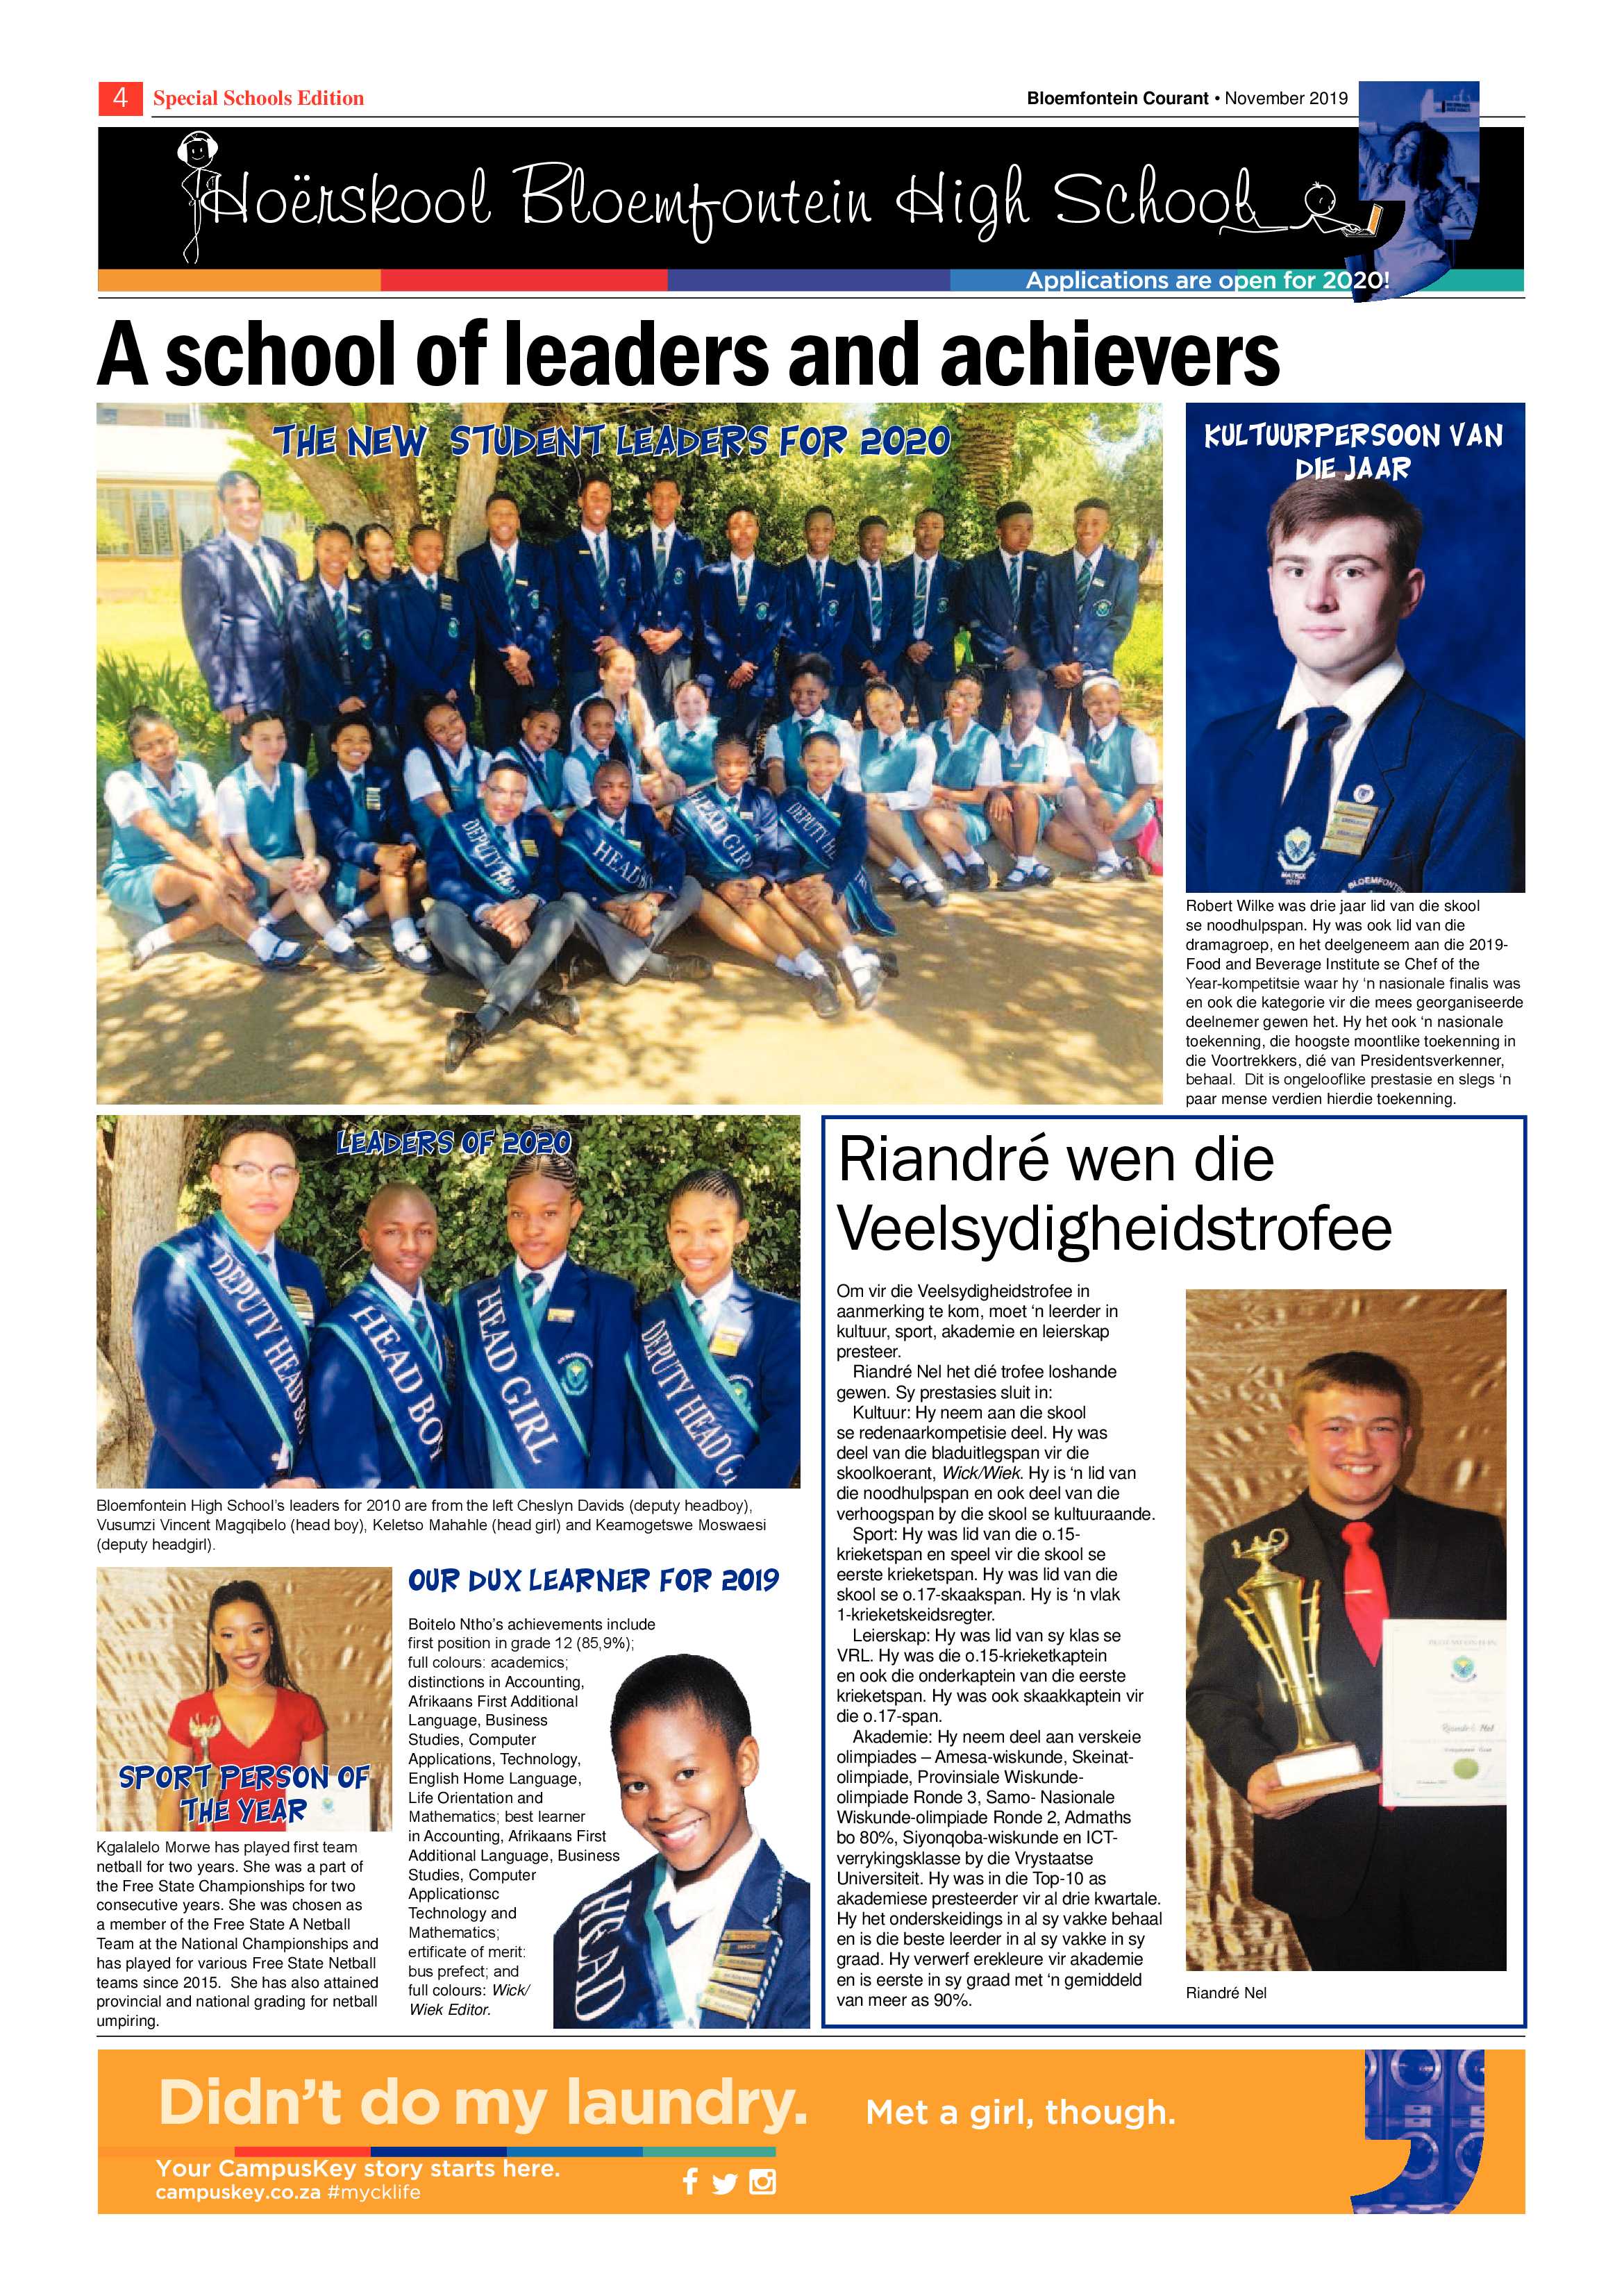 courant-15-november-2019-school-special-edition-epapers-page-4